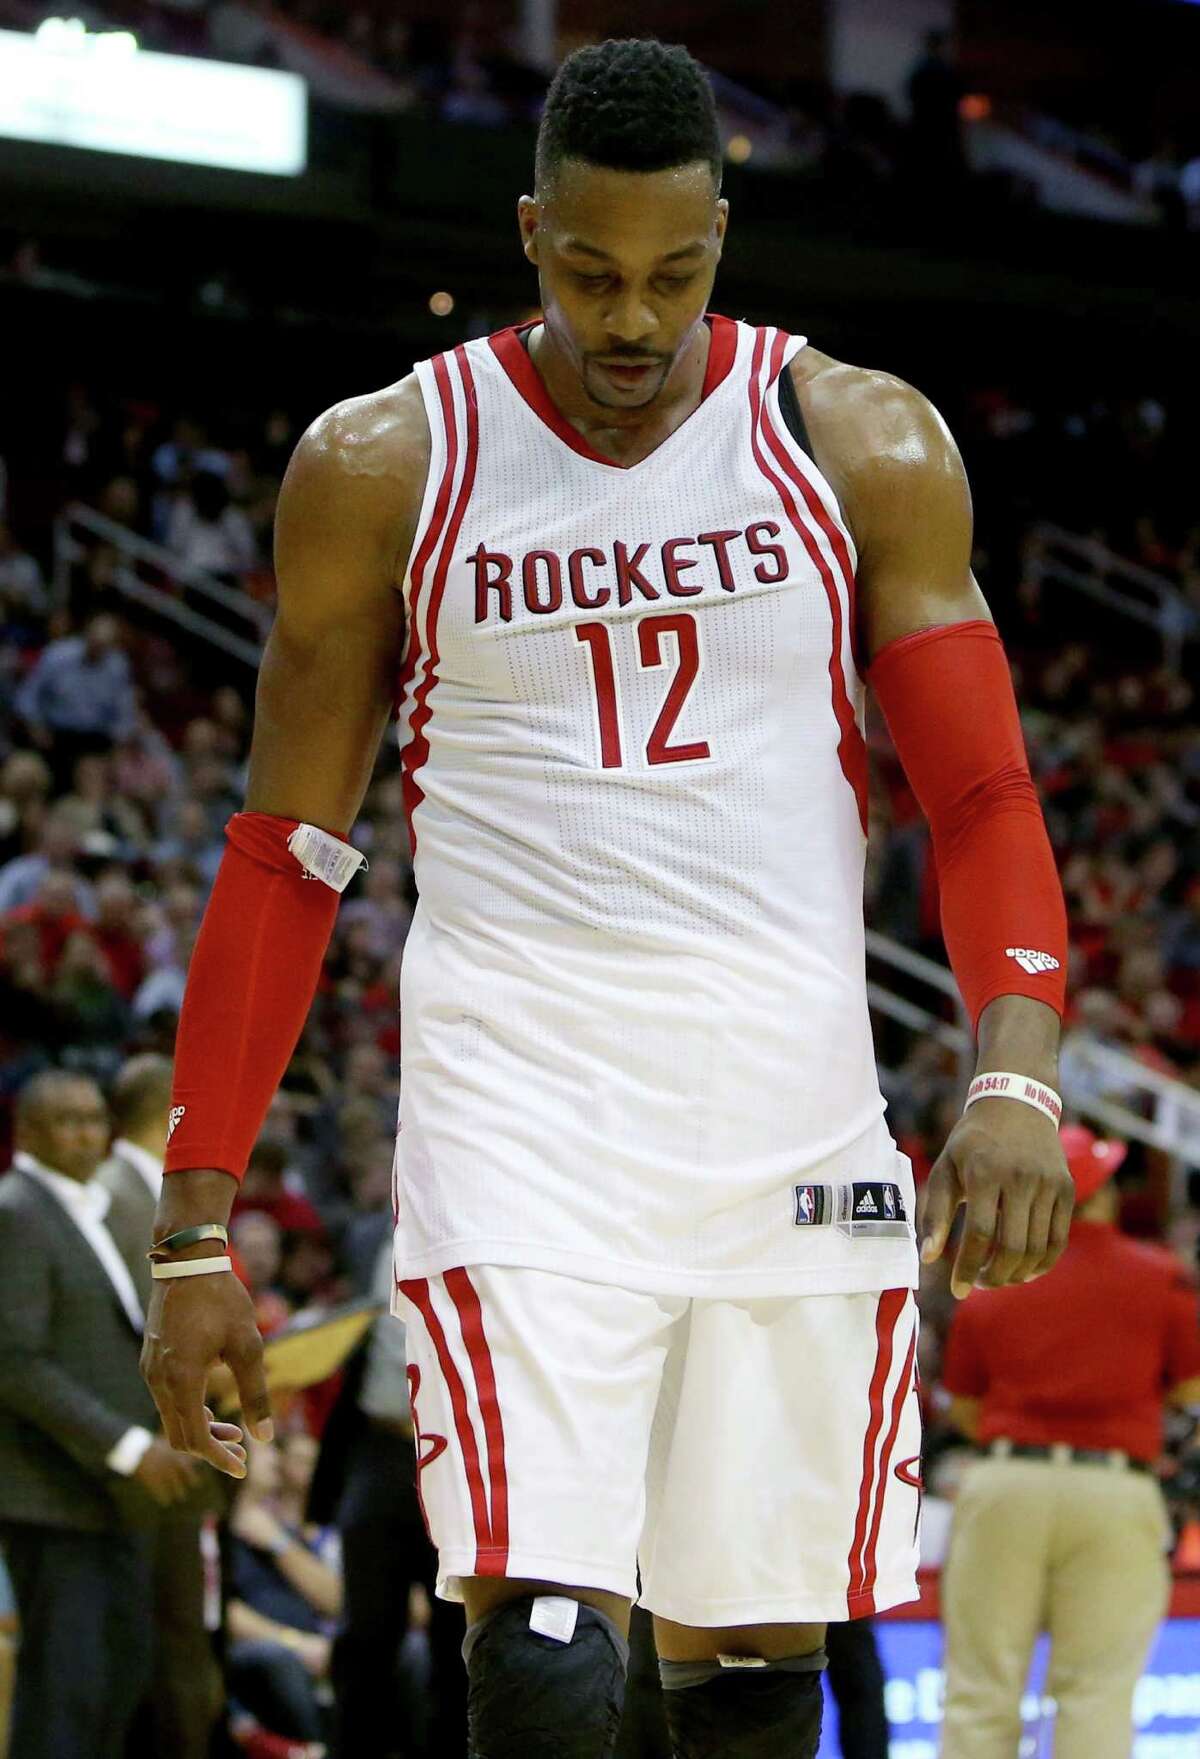 Houston Rockets center Dwight Howard (12) leaves the court after being called for a second technical foul during a game against the Washington Wizards in the fourth quarter at the Toyota Center Saturday, Jan. 30, 2016, in Houston, Texas. Howard was ejected from the game along with Washington Wizards center Nene Hilario (42). Rockets lost 122-123. ( Gary Coronado / Houston Chronicle )